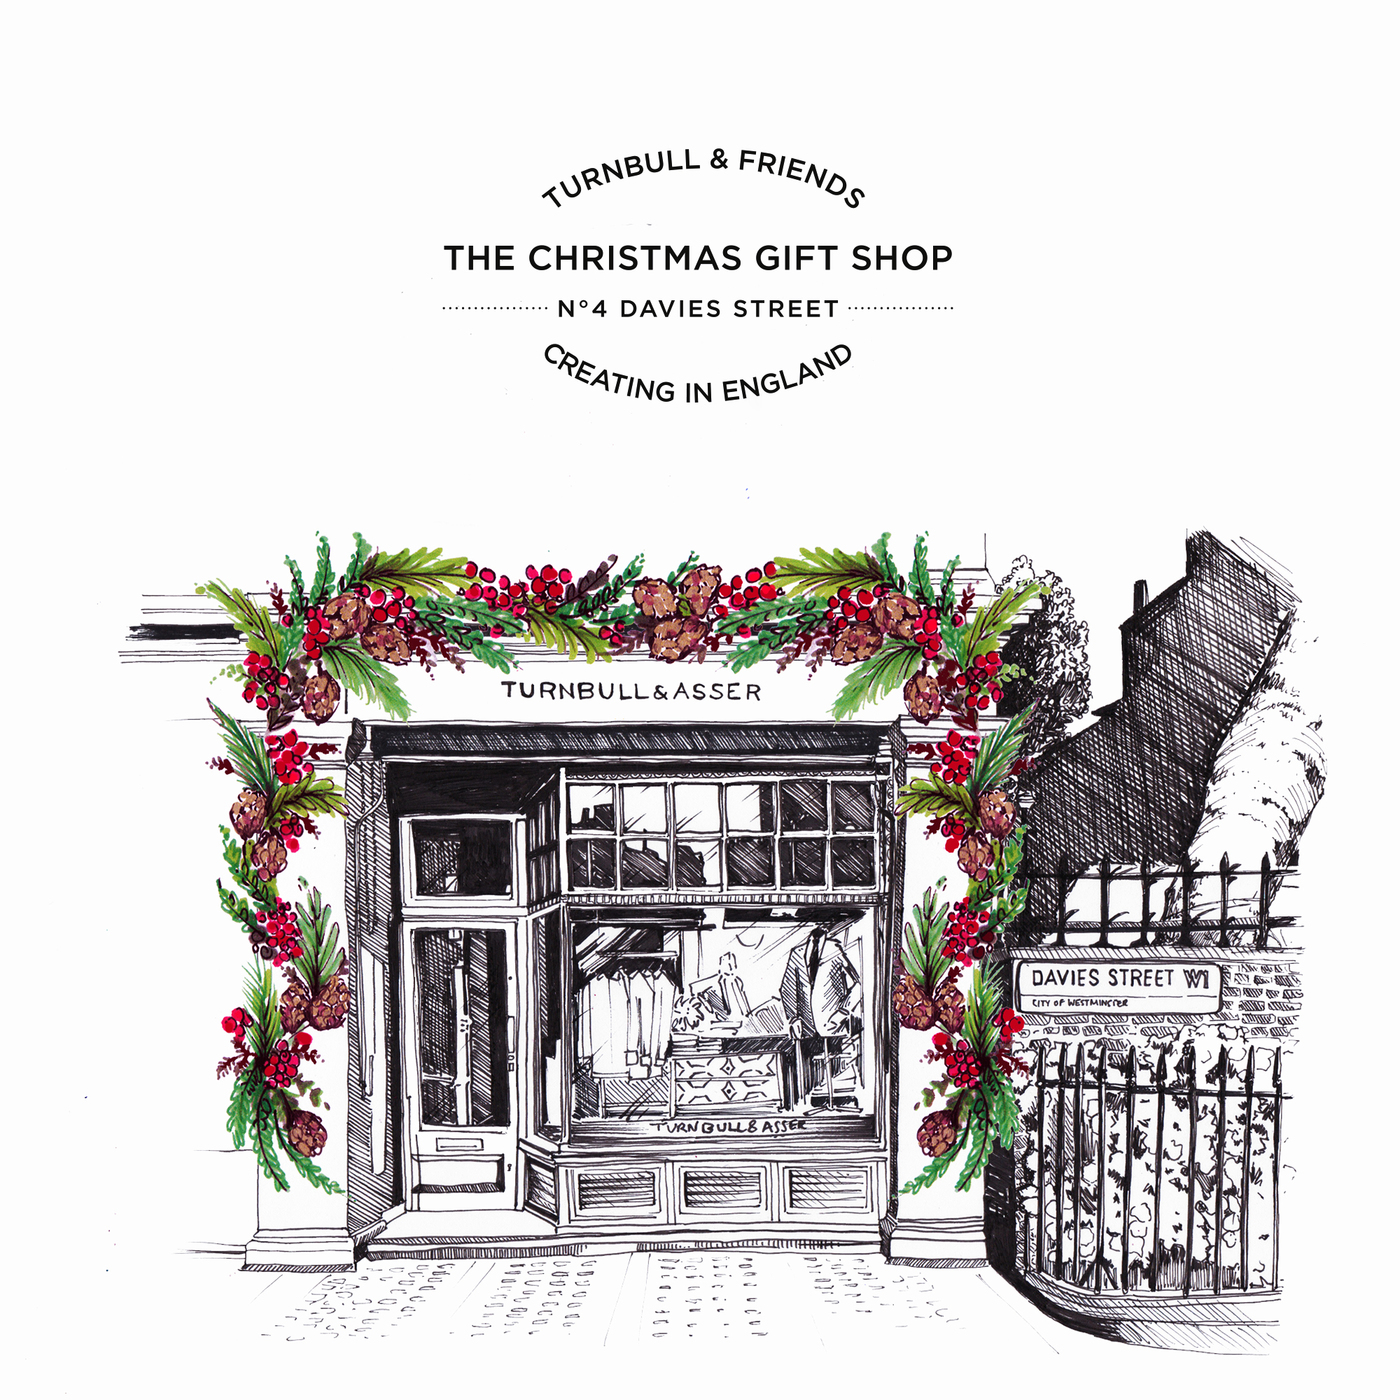 Turnbull & Friends - The Christmas Gift Shop